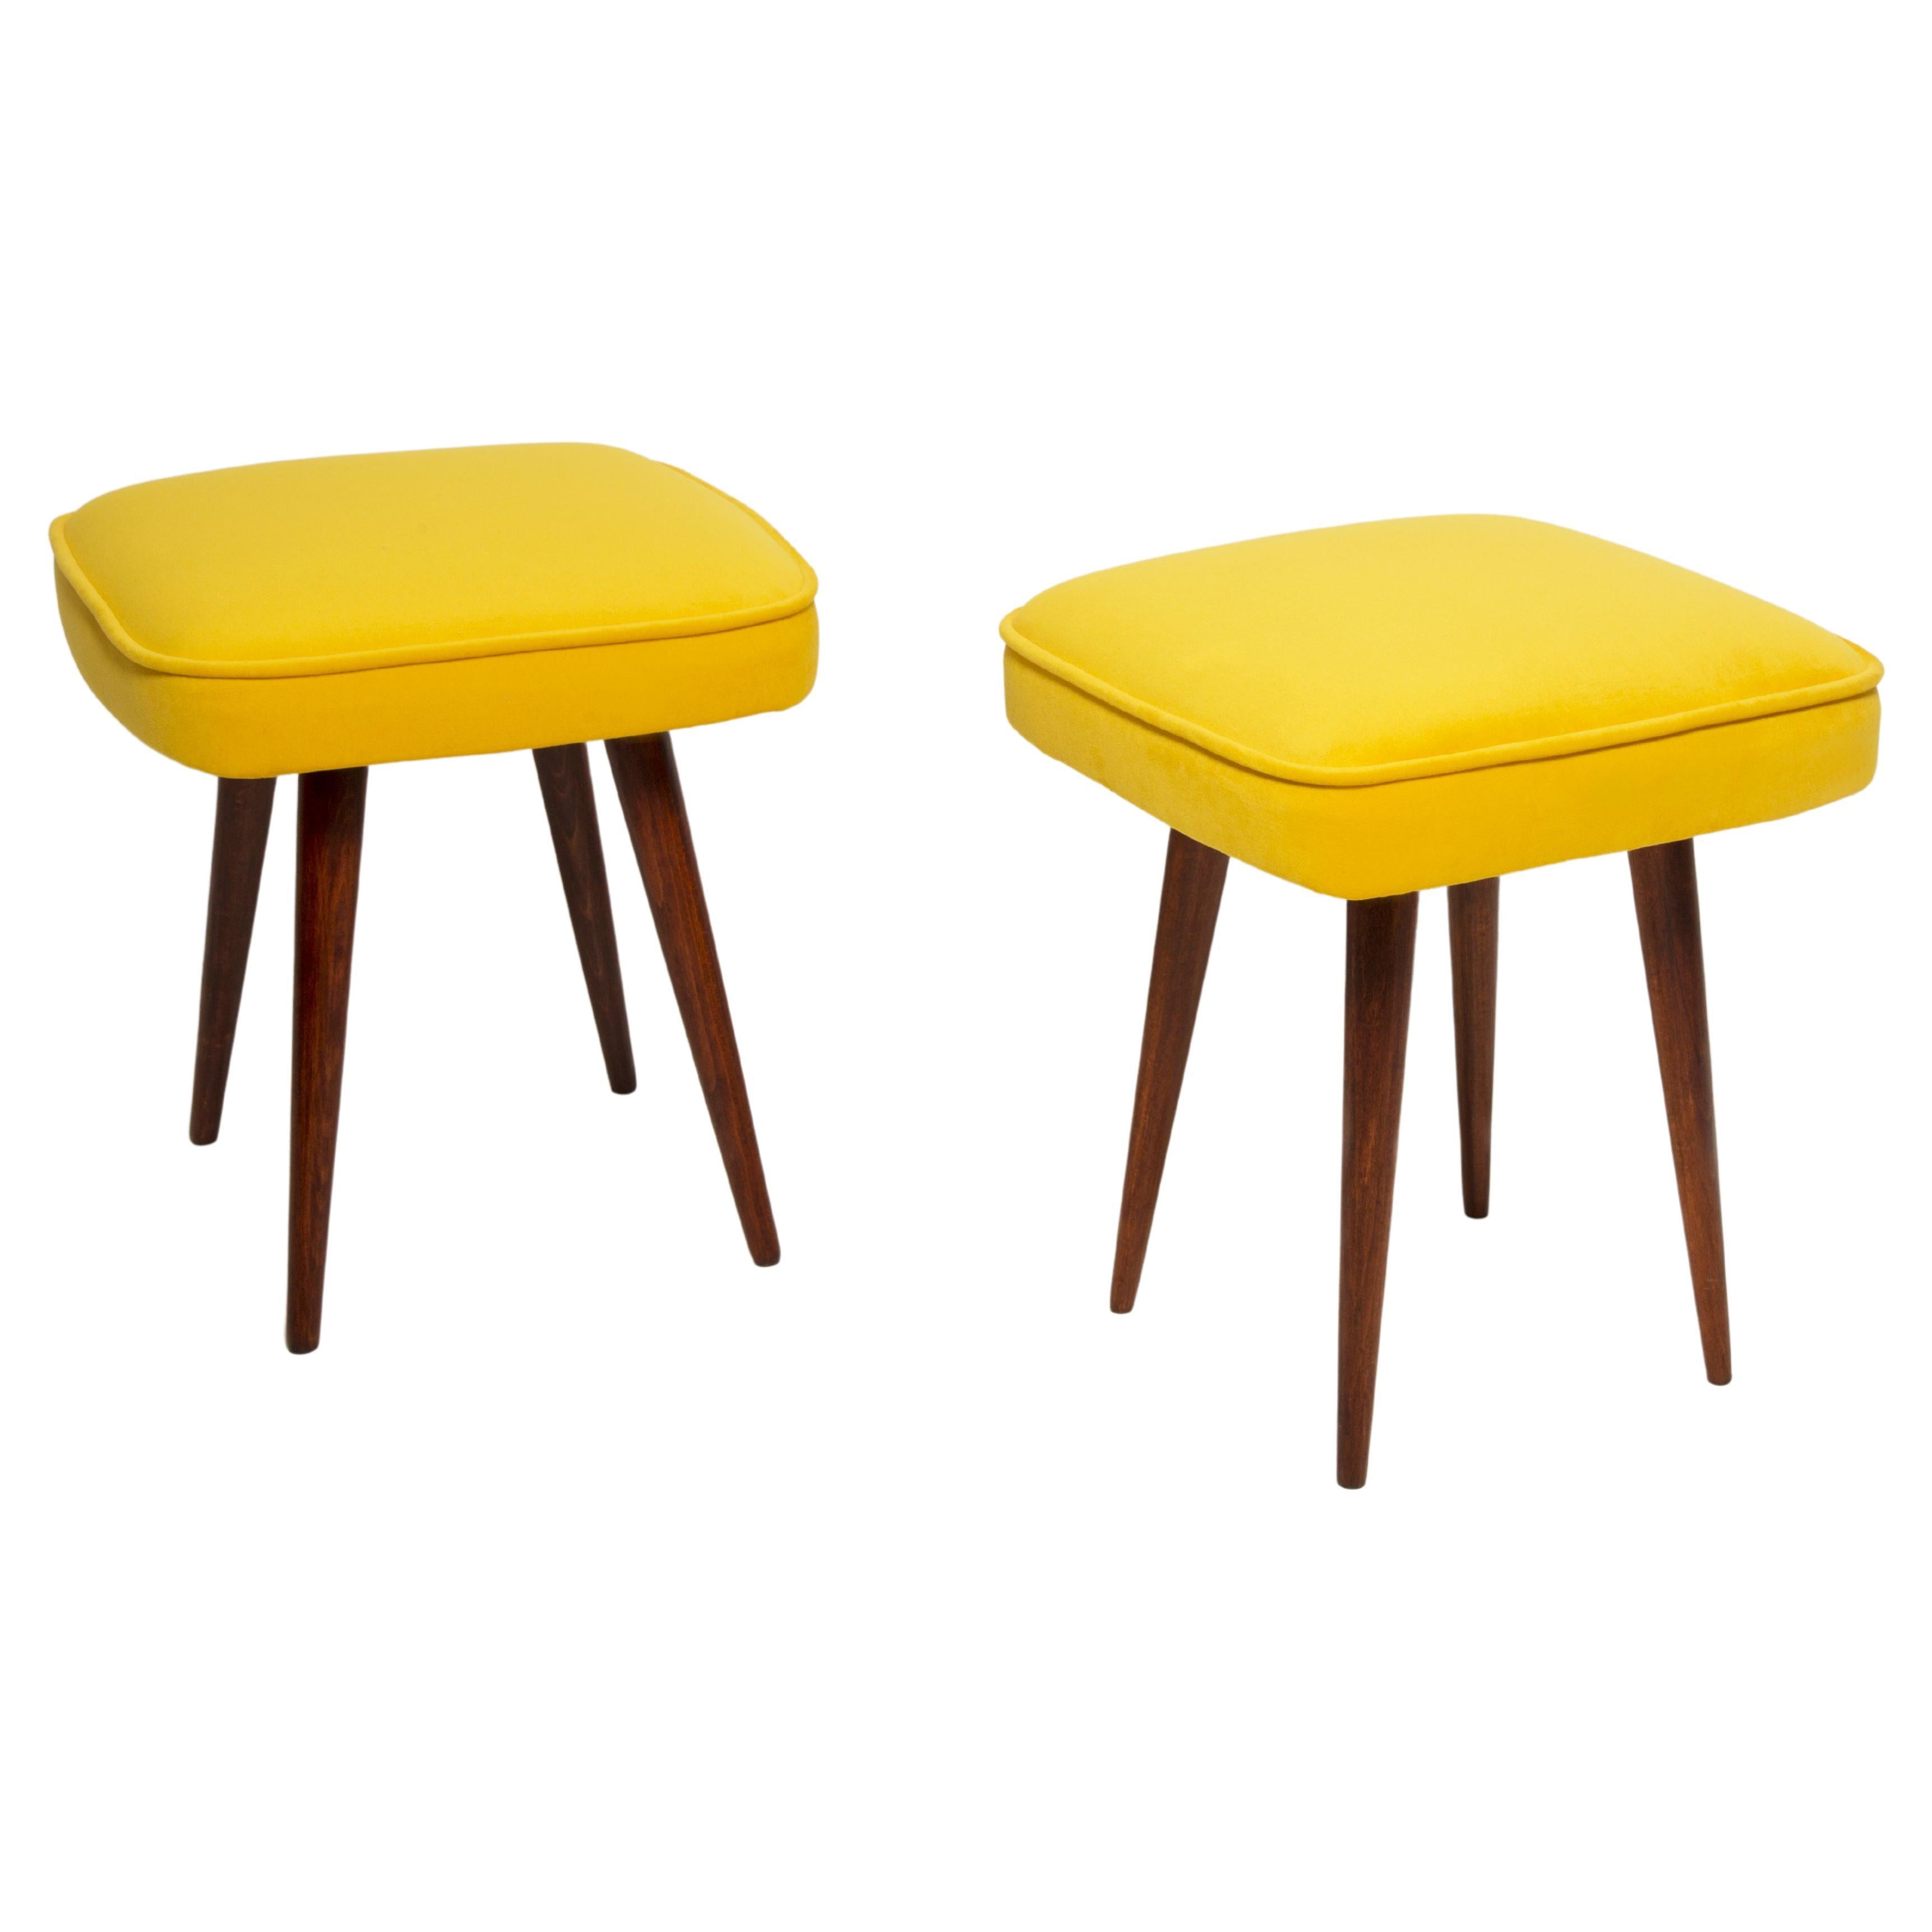 Set of Two Mid-Century Yellow Velvet Foot Stools, Europe, 1960s For Sale